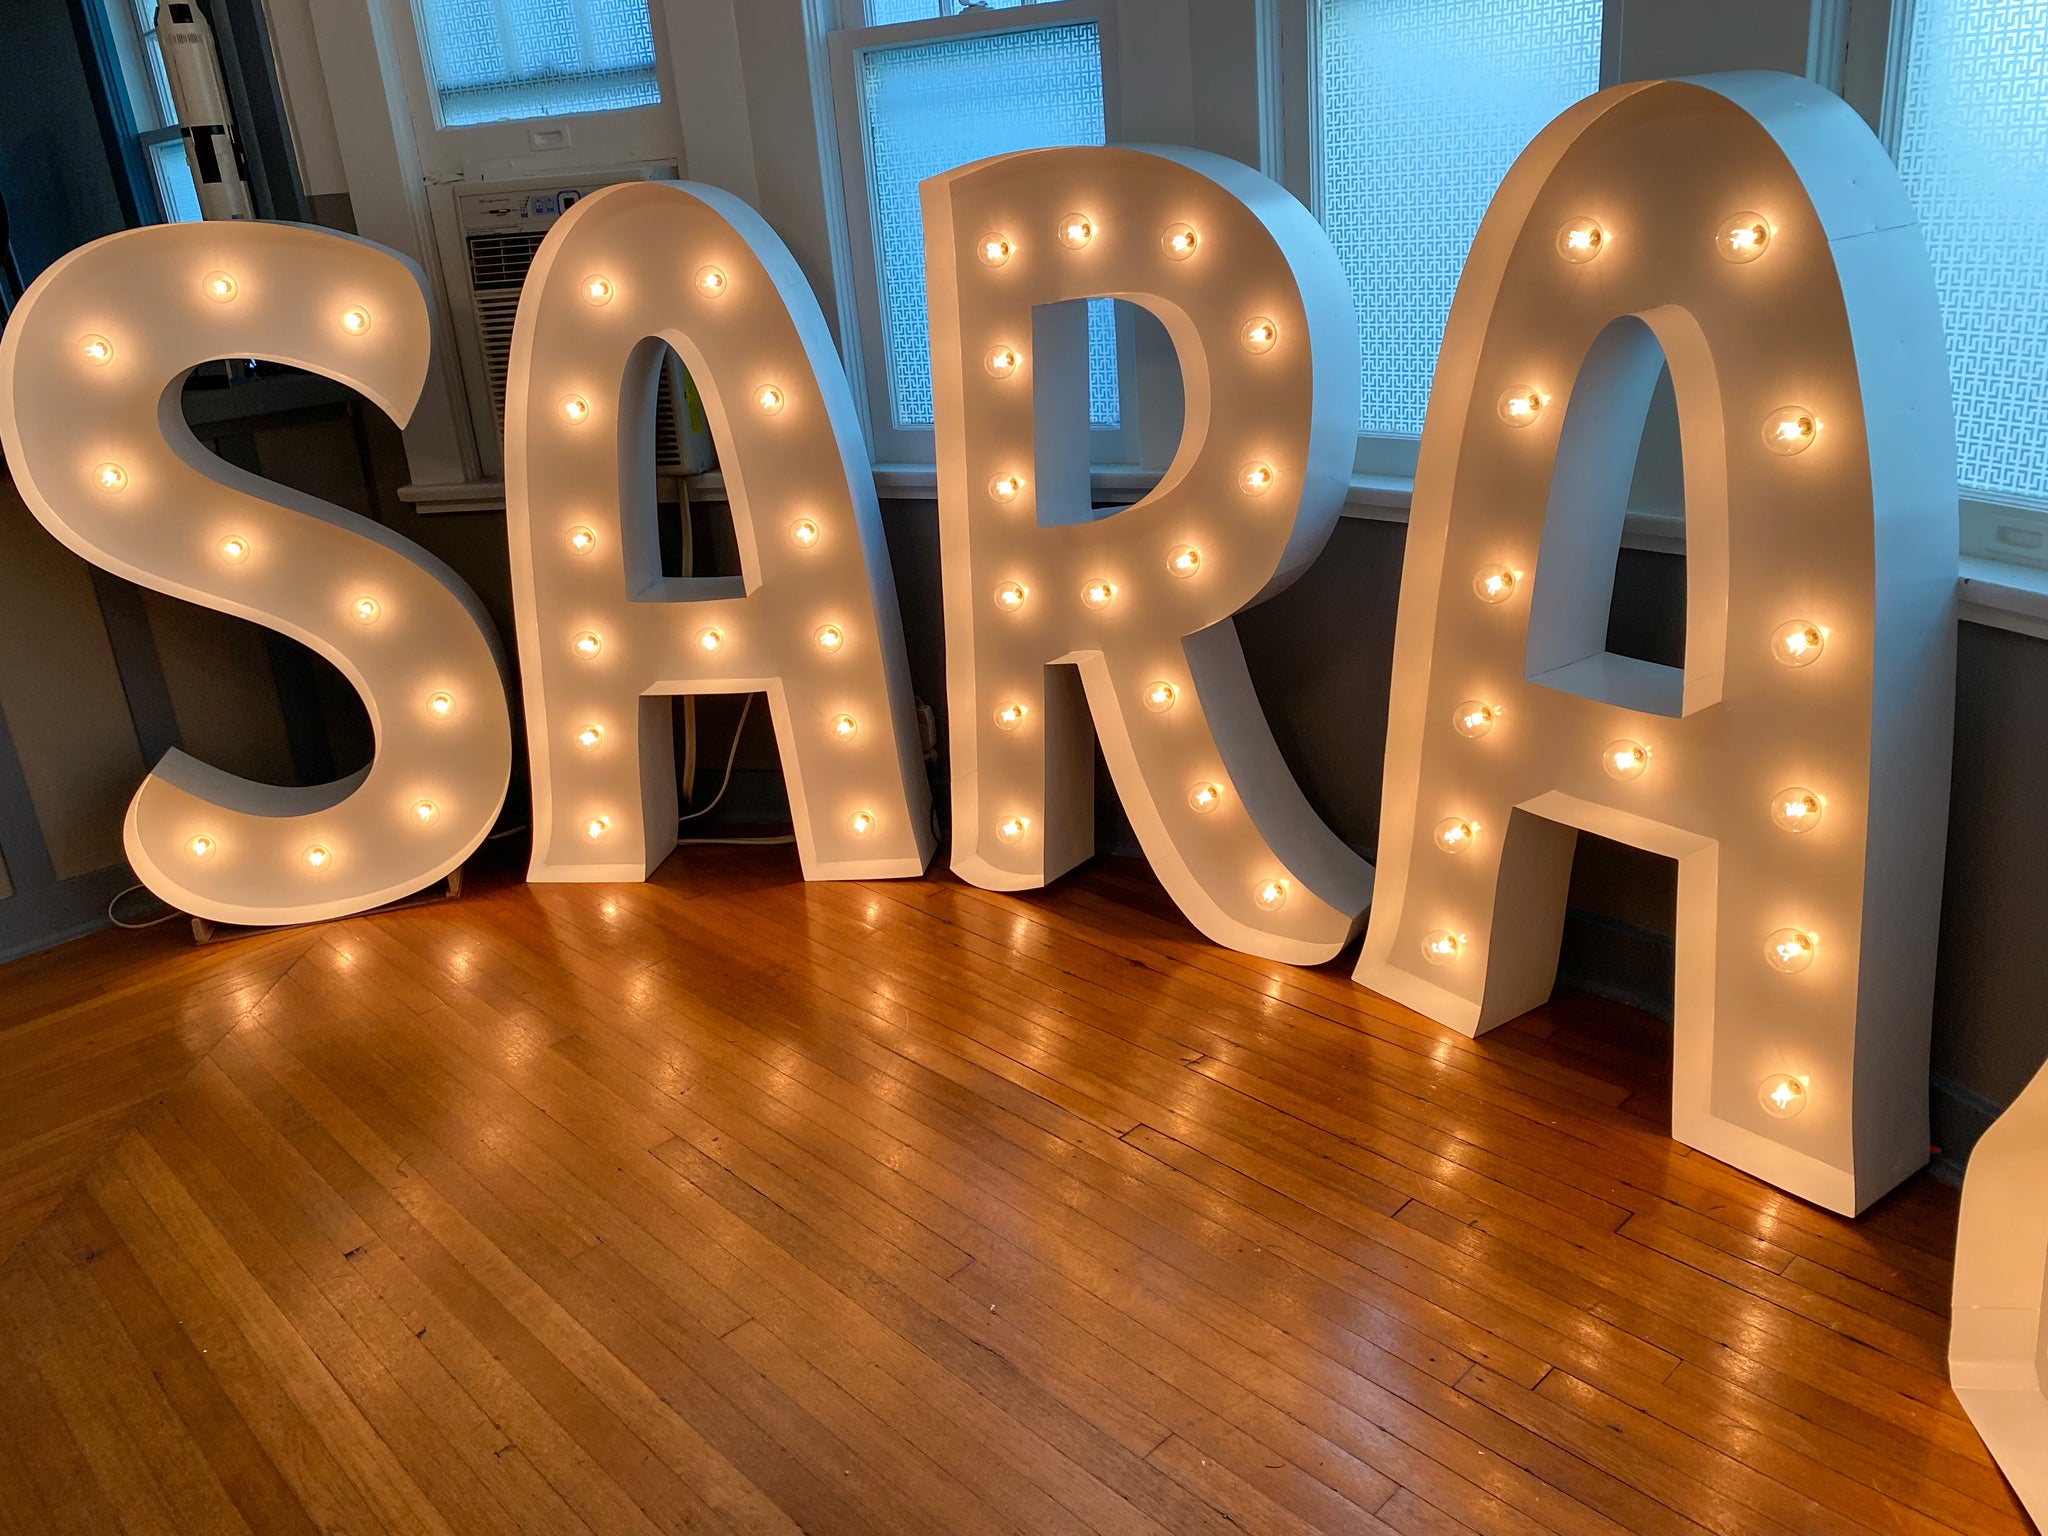 Custom Wooden Letter Sign Wall Decor, Large Wall Letters Baby Name